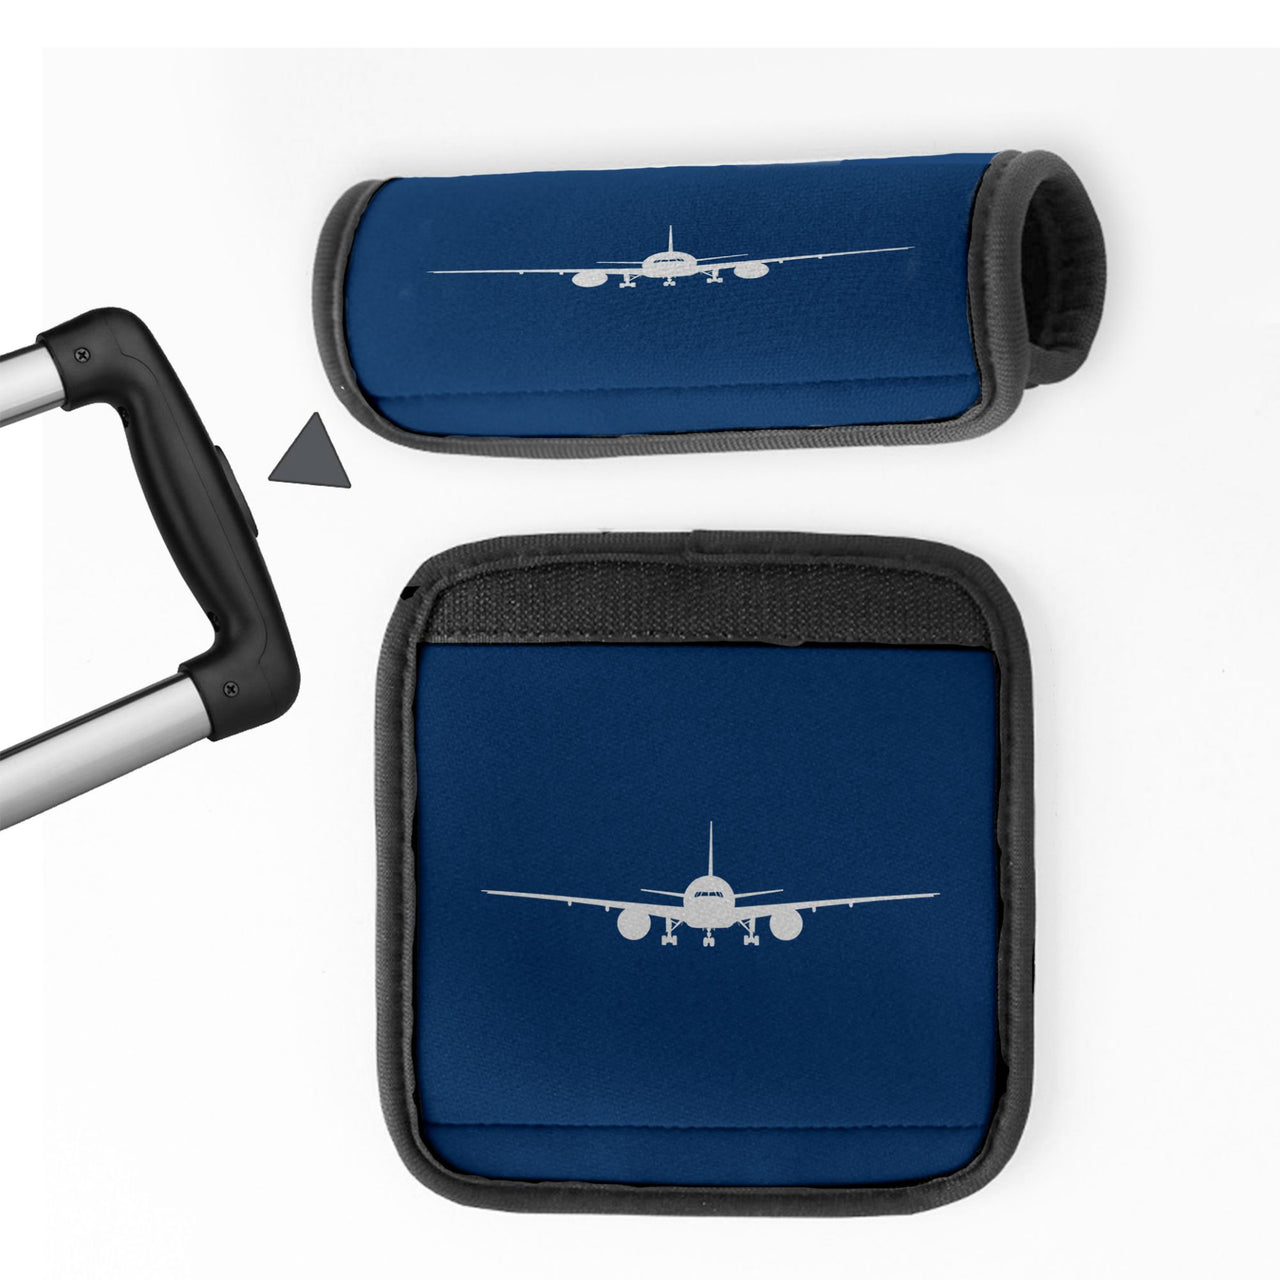 Boeing 777 Silhouette Designed Neoprene Luggage Handle Covers